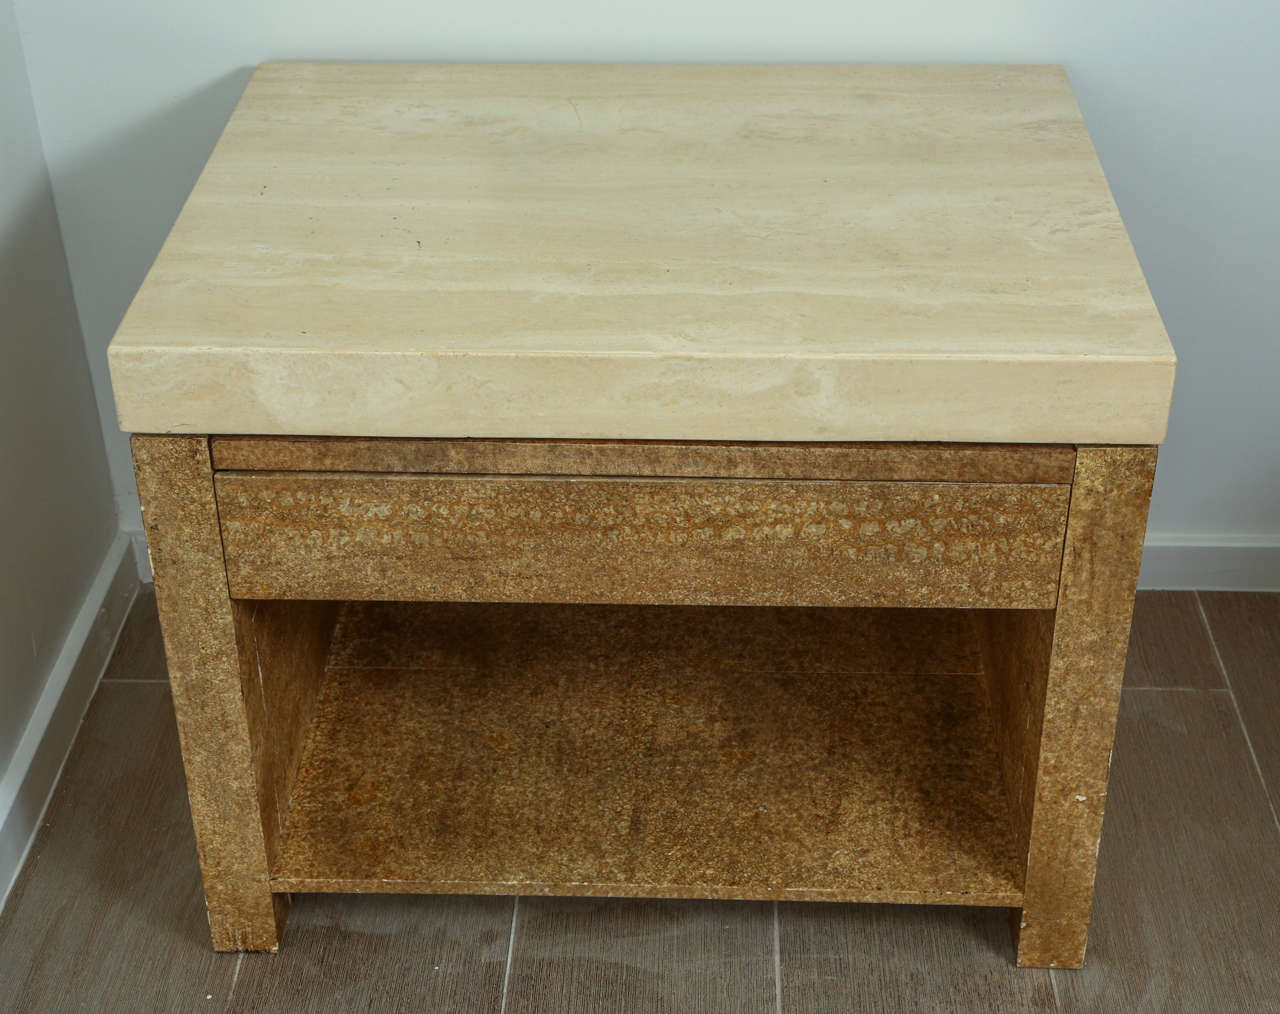 Pair of wooden end tables with travertine tops. The wood has a faux stone finish. Each has one drawer with a pull-out shelf above. Each has an open shelf at the bottom.
wear consistent with age